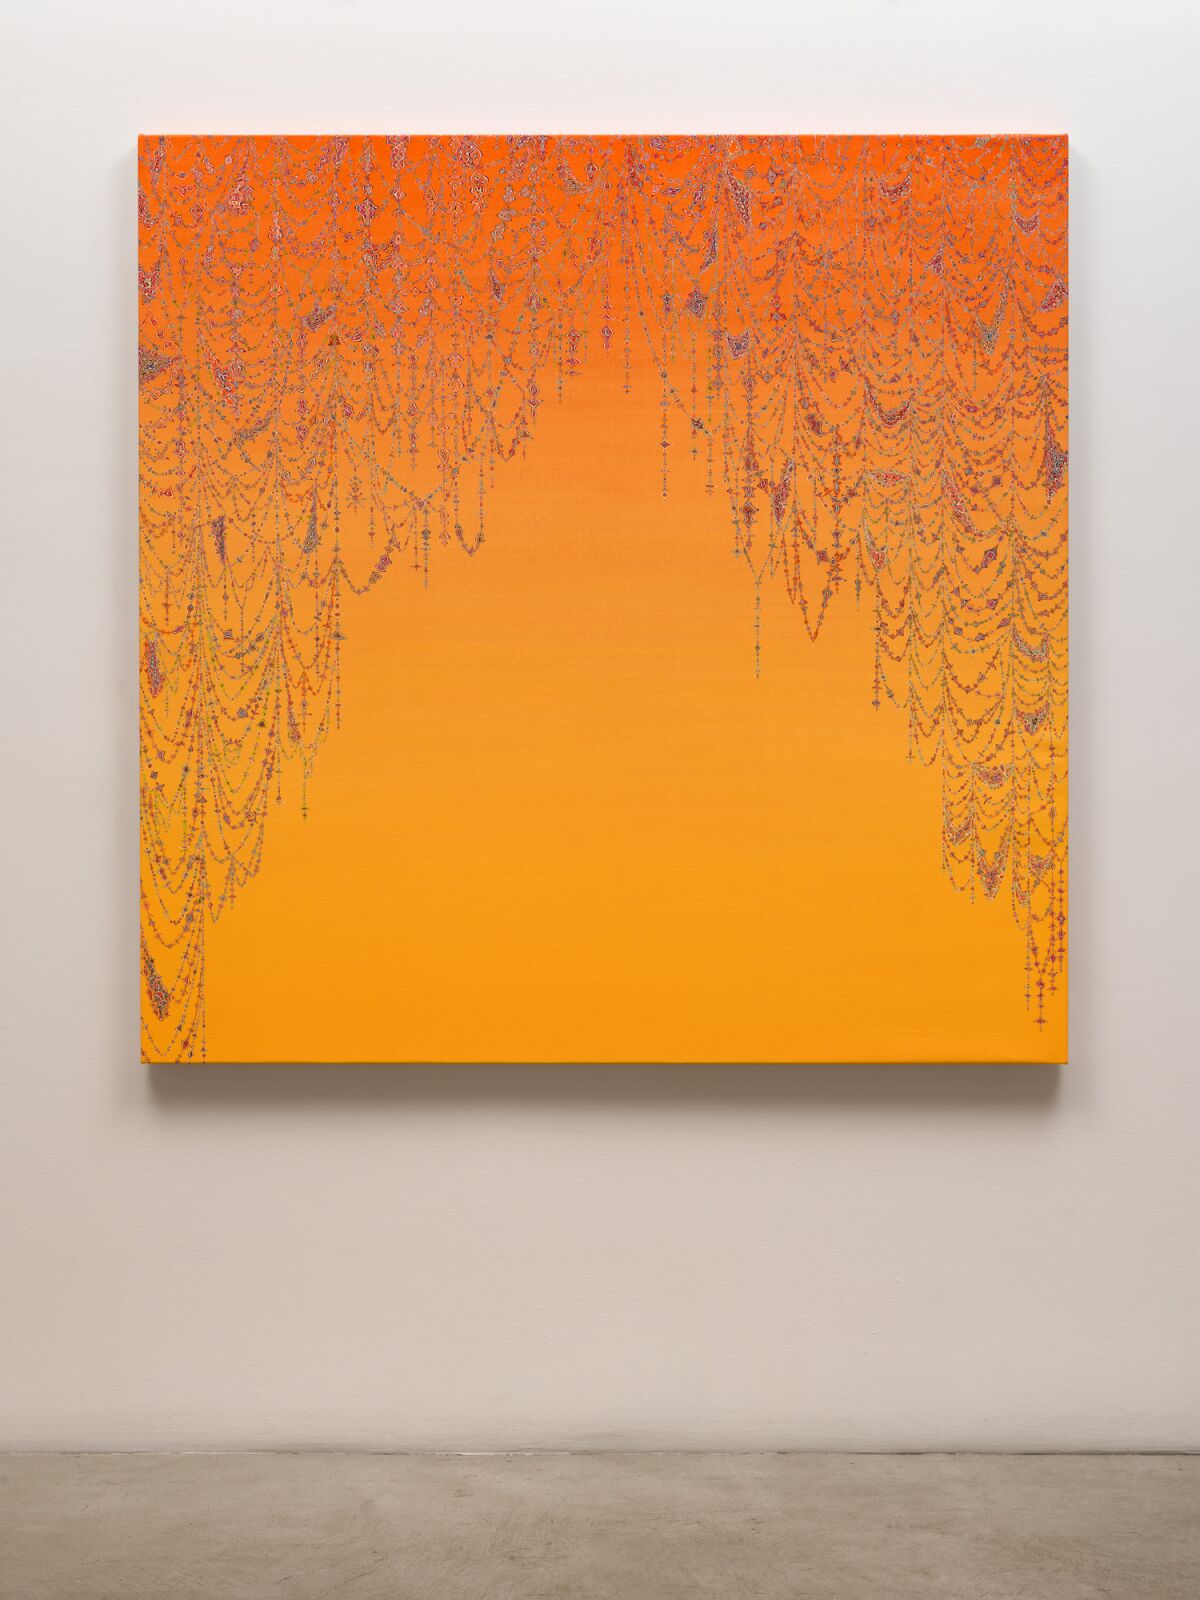 Veil (Orange to Yellow) by Kelsey Brookes